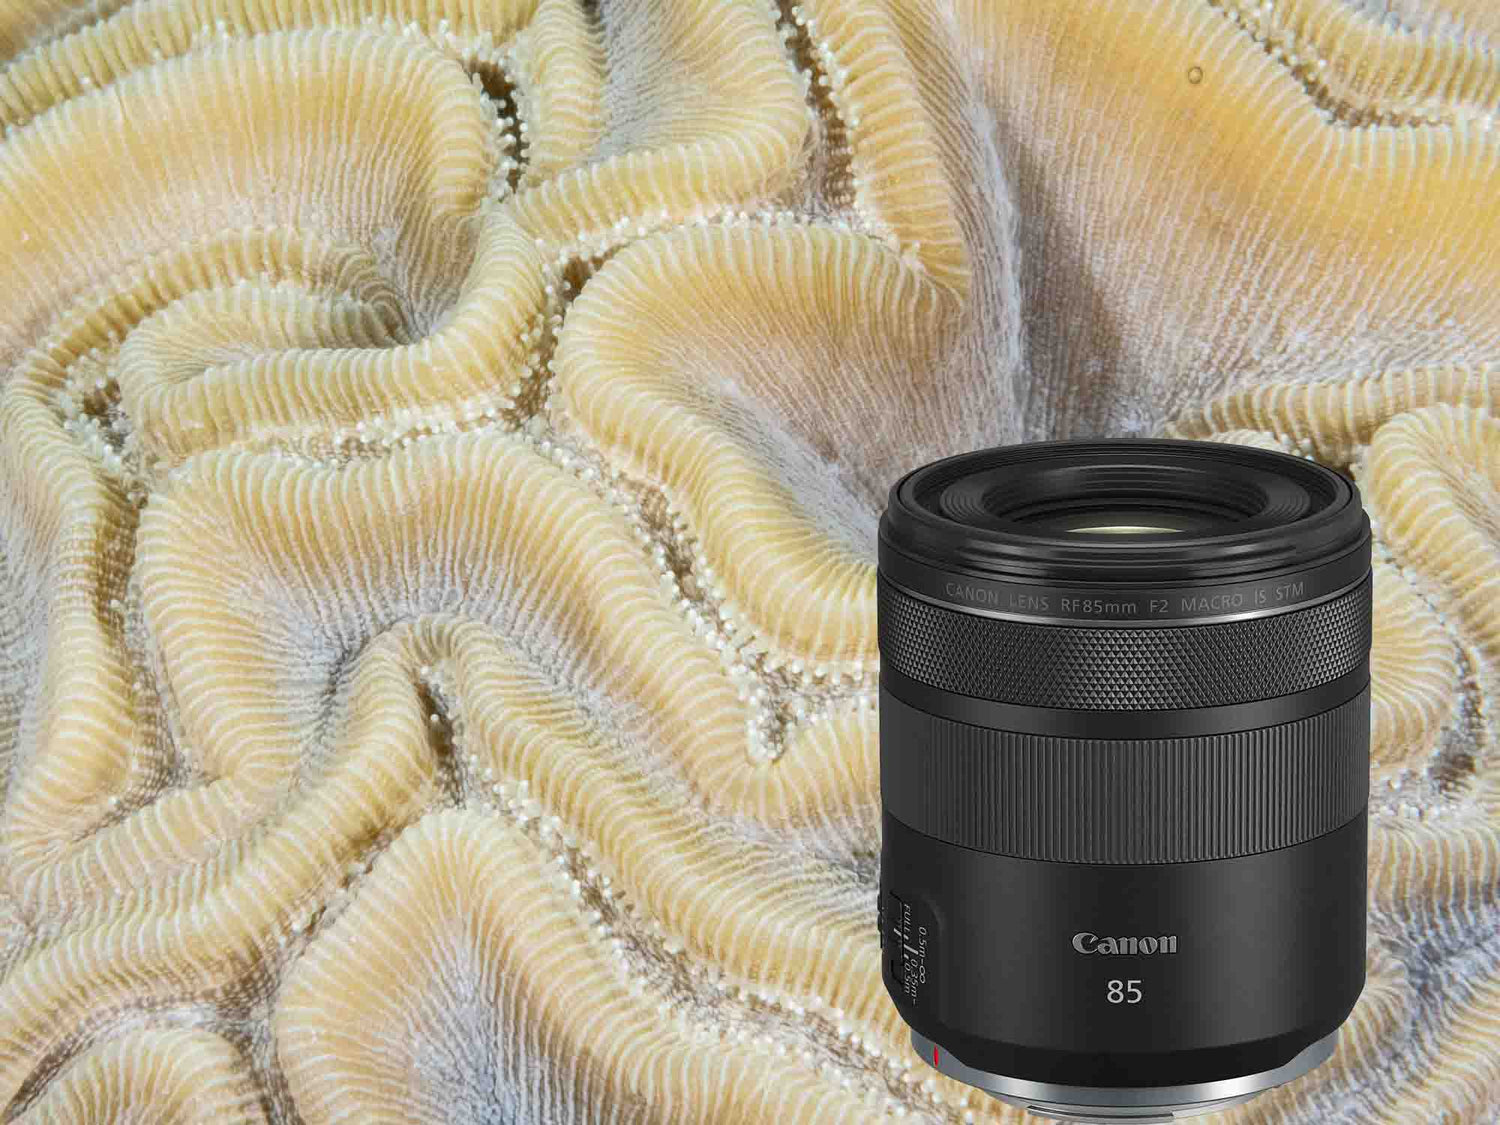 Canon RF 85mm f/2 Macro IS STM Lens Underwater Photos and Review